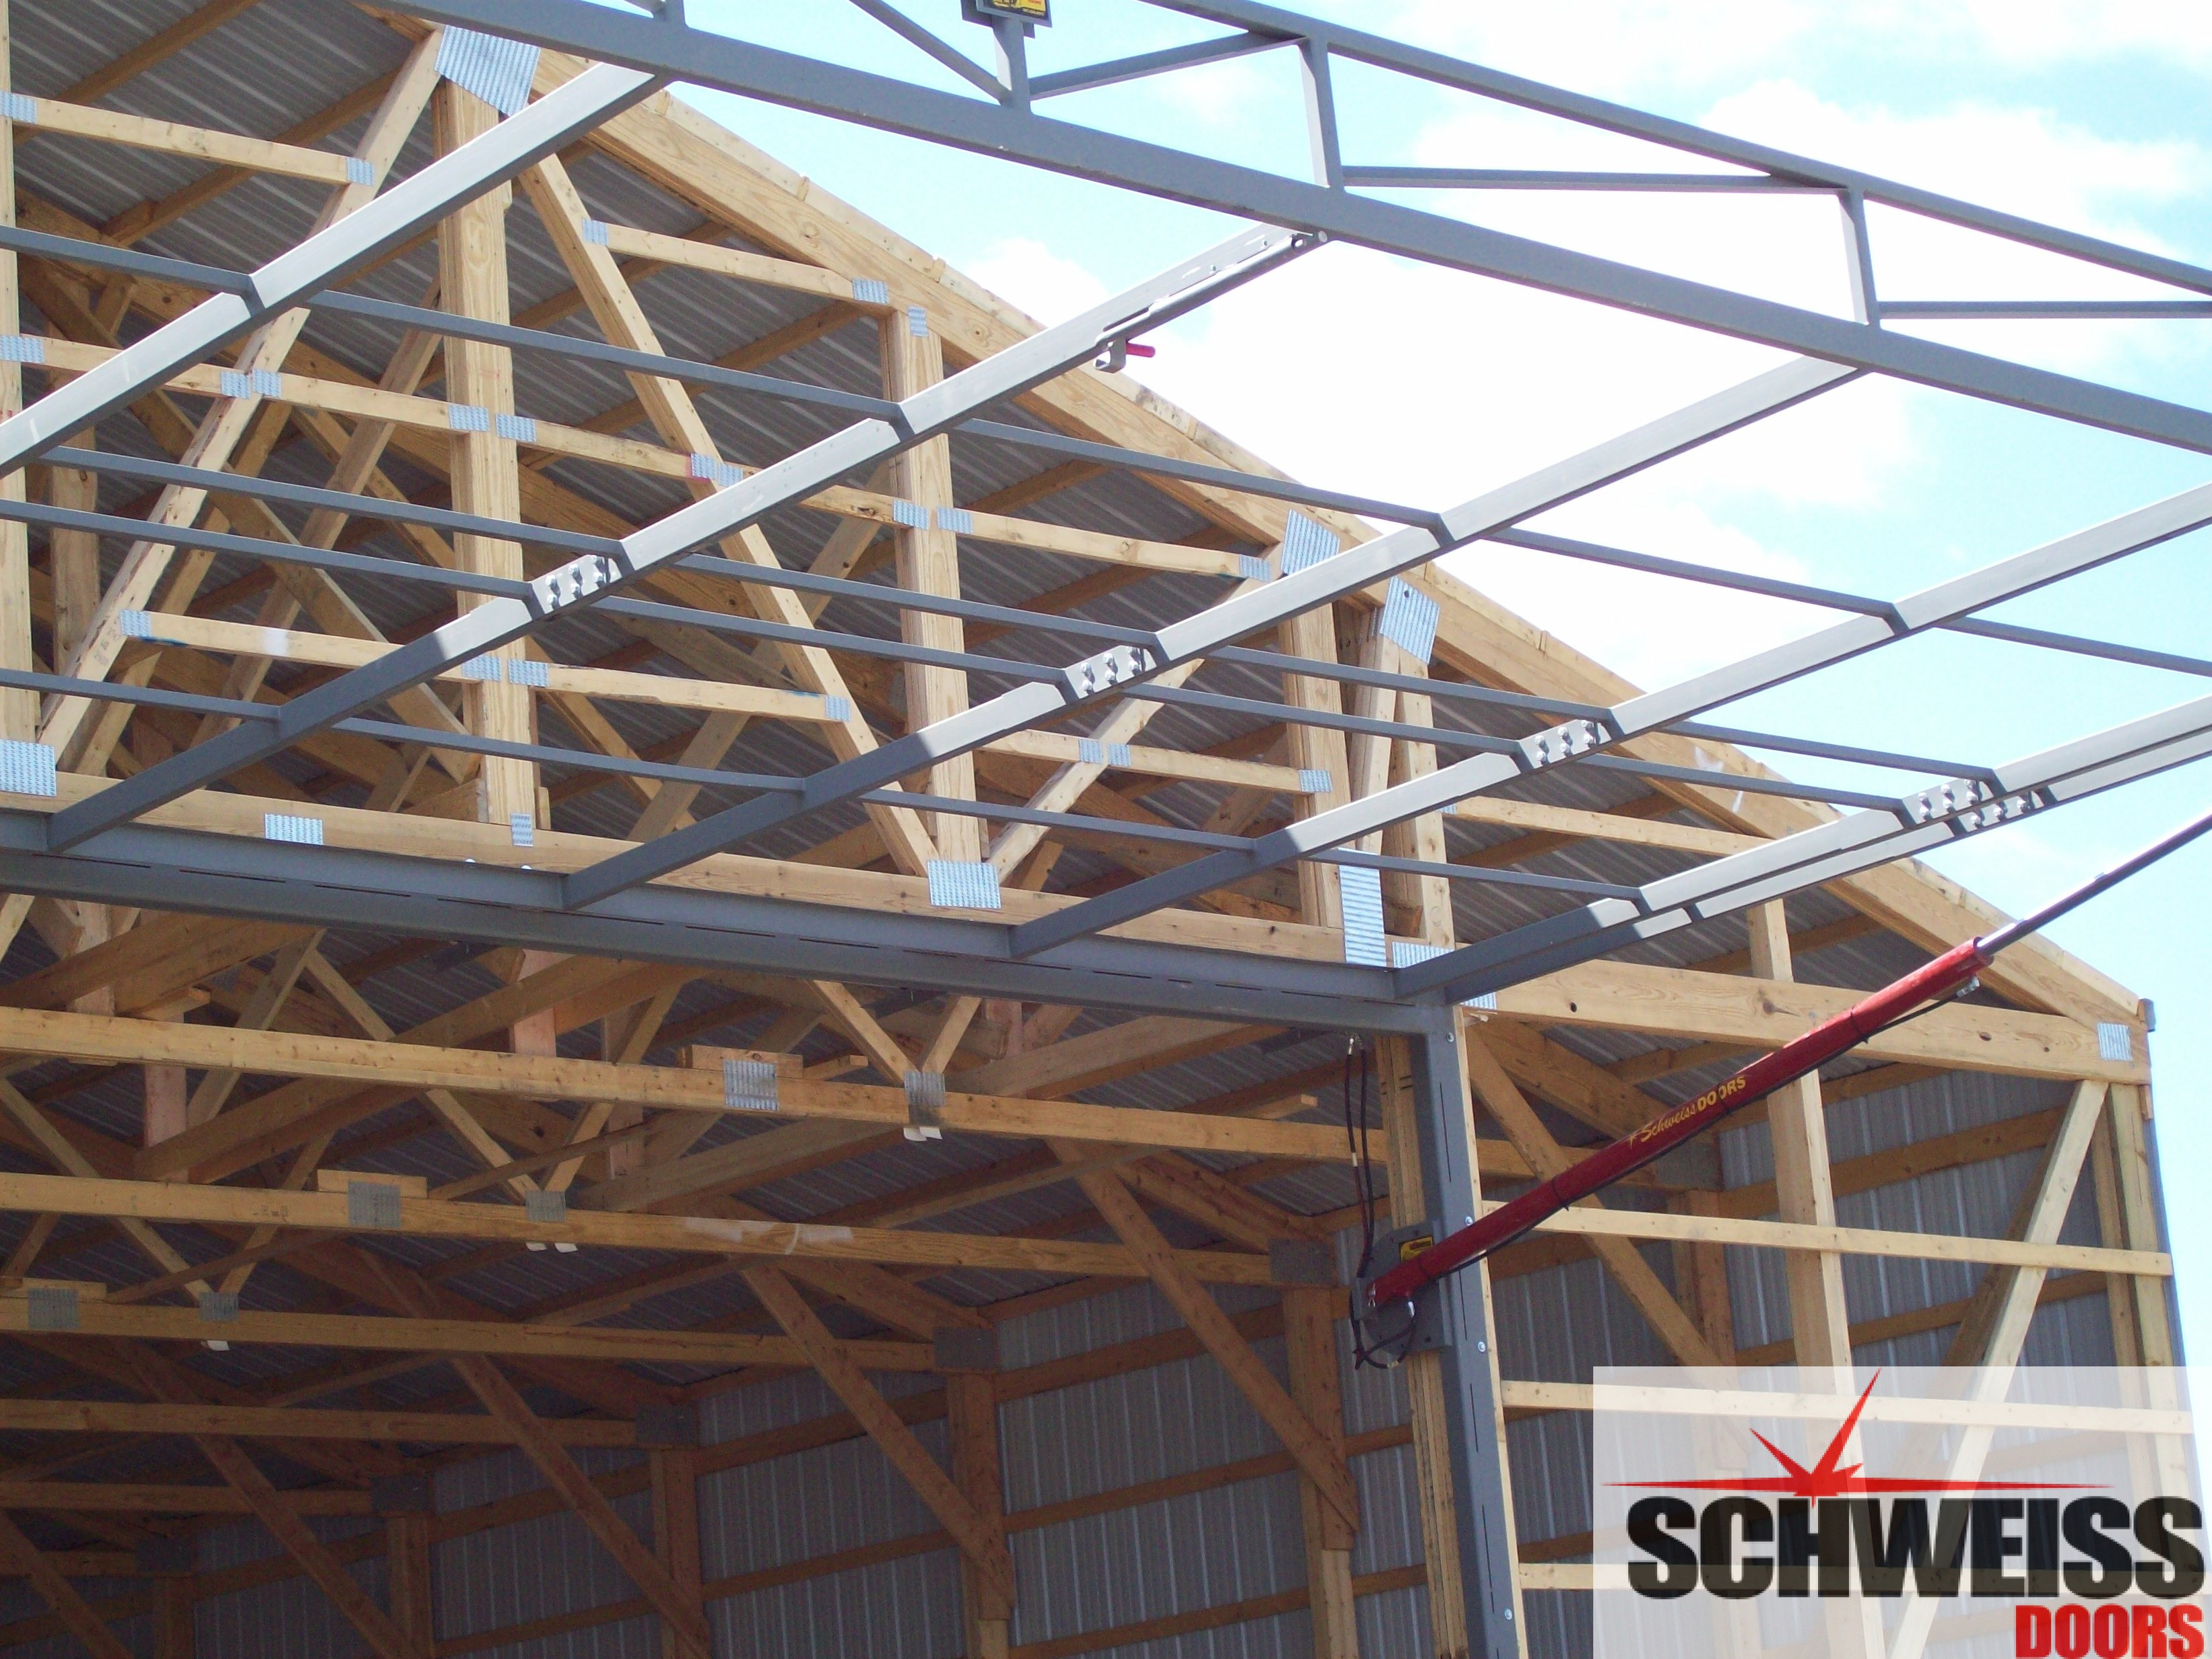 Strong hydraulic door framework, no wood, only steel